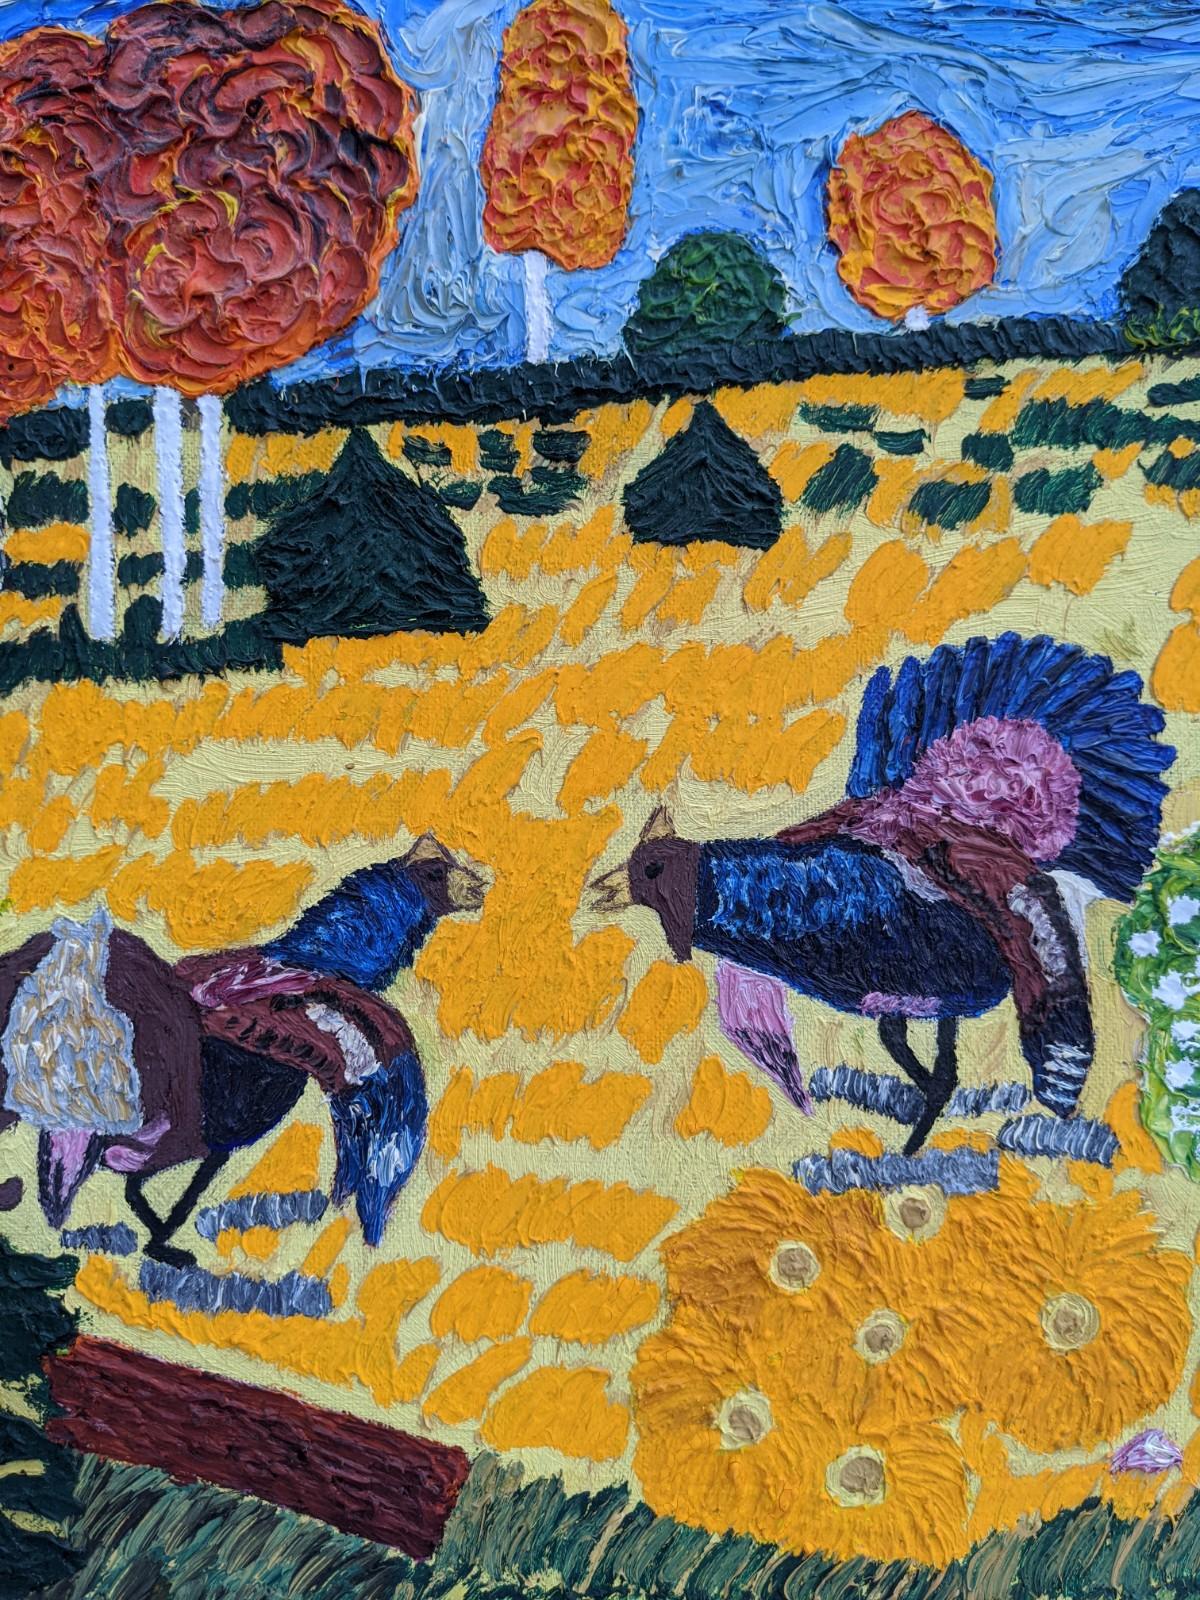 ROOSTERS
Size: 46 x 55cm
Oil on canvas

A truly striking and vibrant scene of a pair of roosters set within an expressive landscape dotted with trees and other animals. This painting has an exceptional three dimensional quality to it, with very